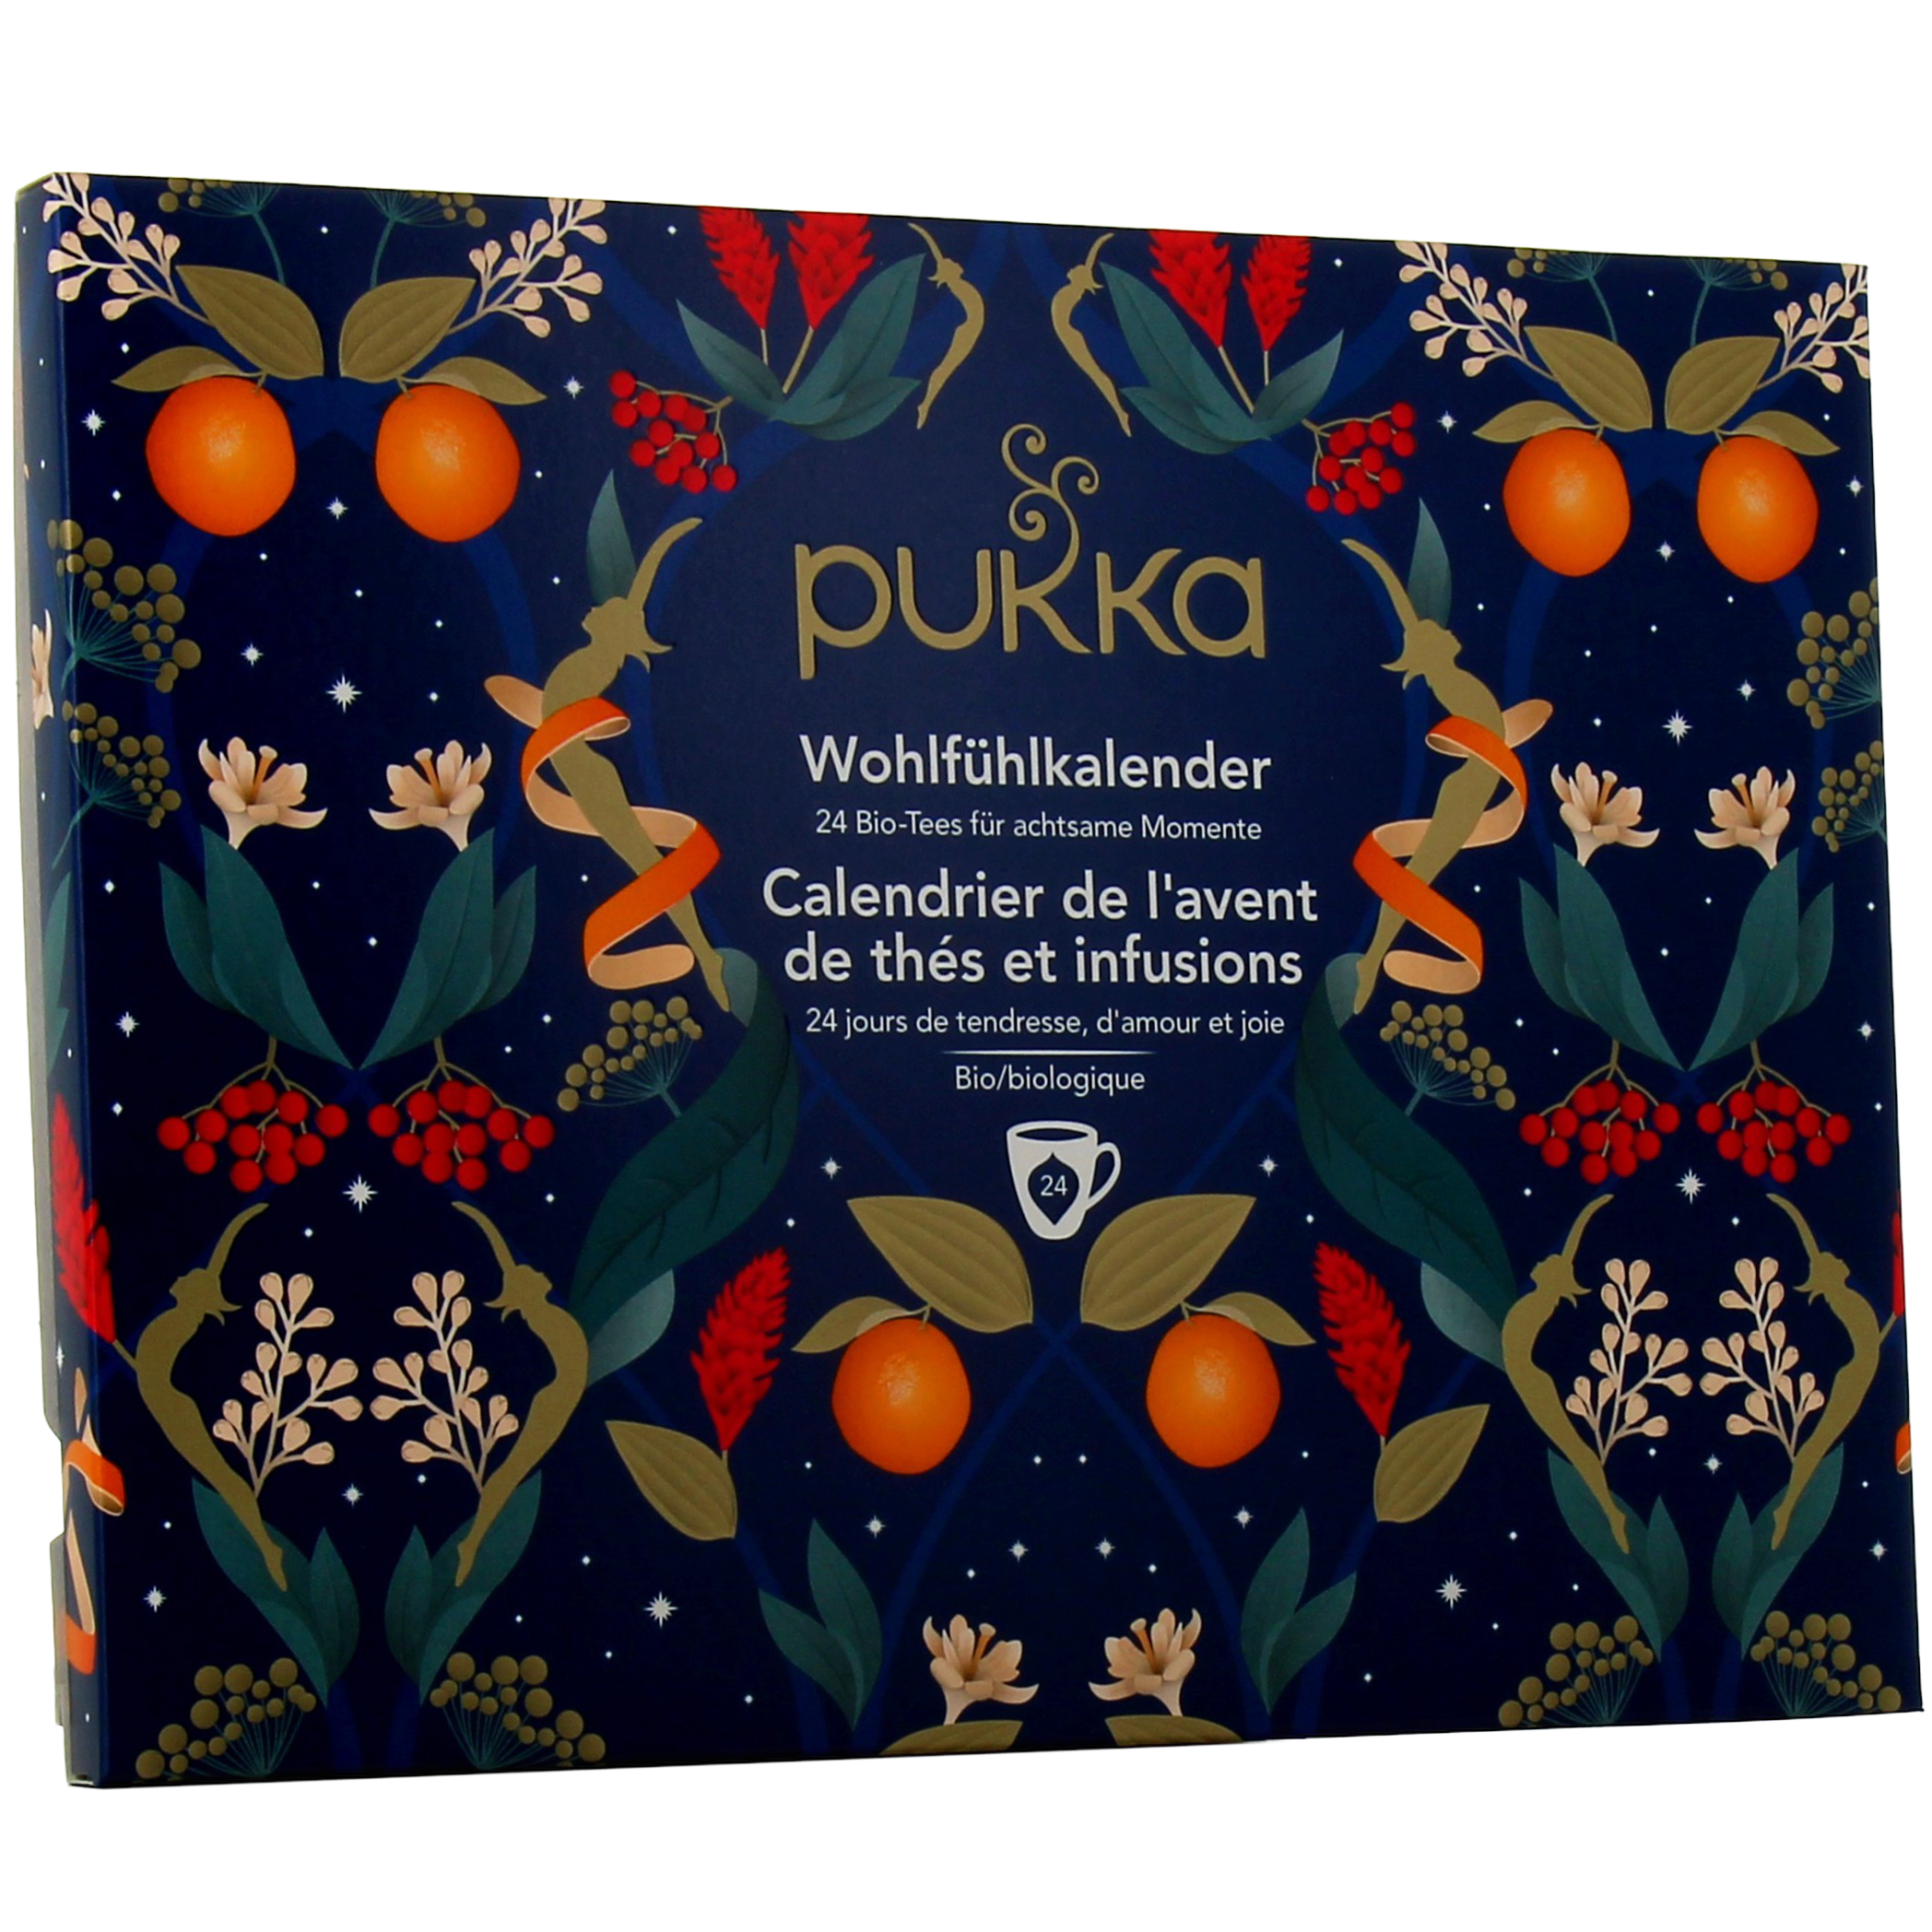 INFUSION AMOUR (20 INFUSETTES), PUKKA